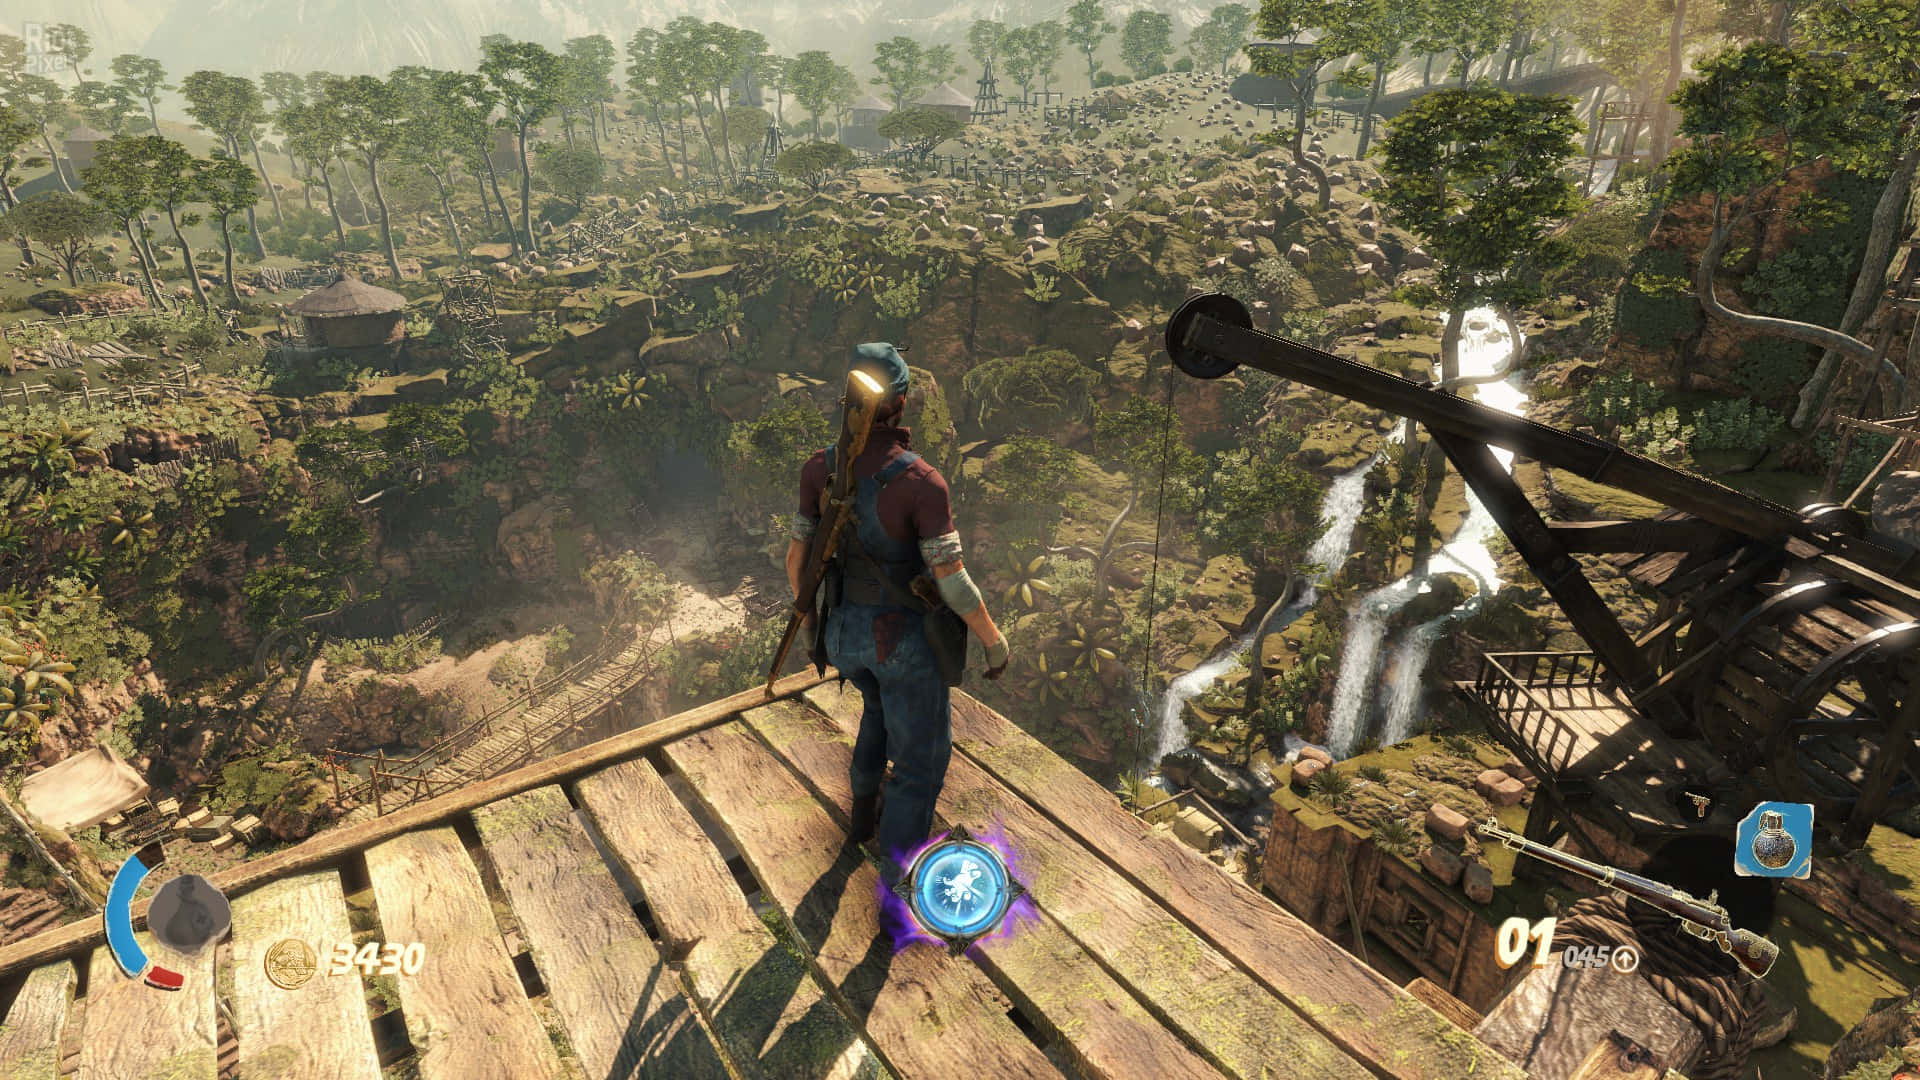 A Man Is Standing On A Wooden Platform In A Video Game